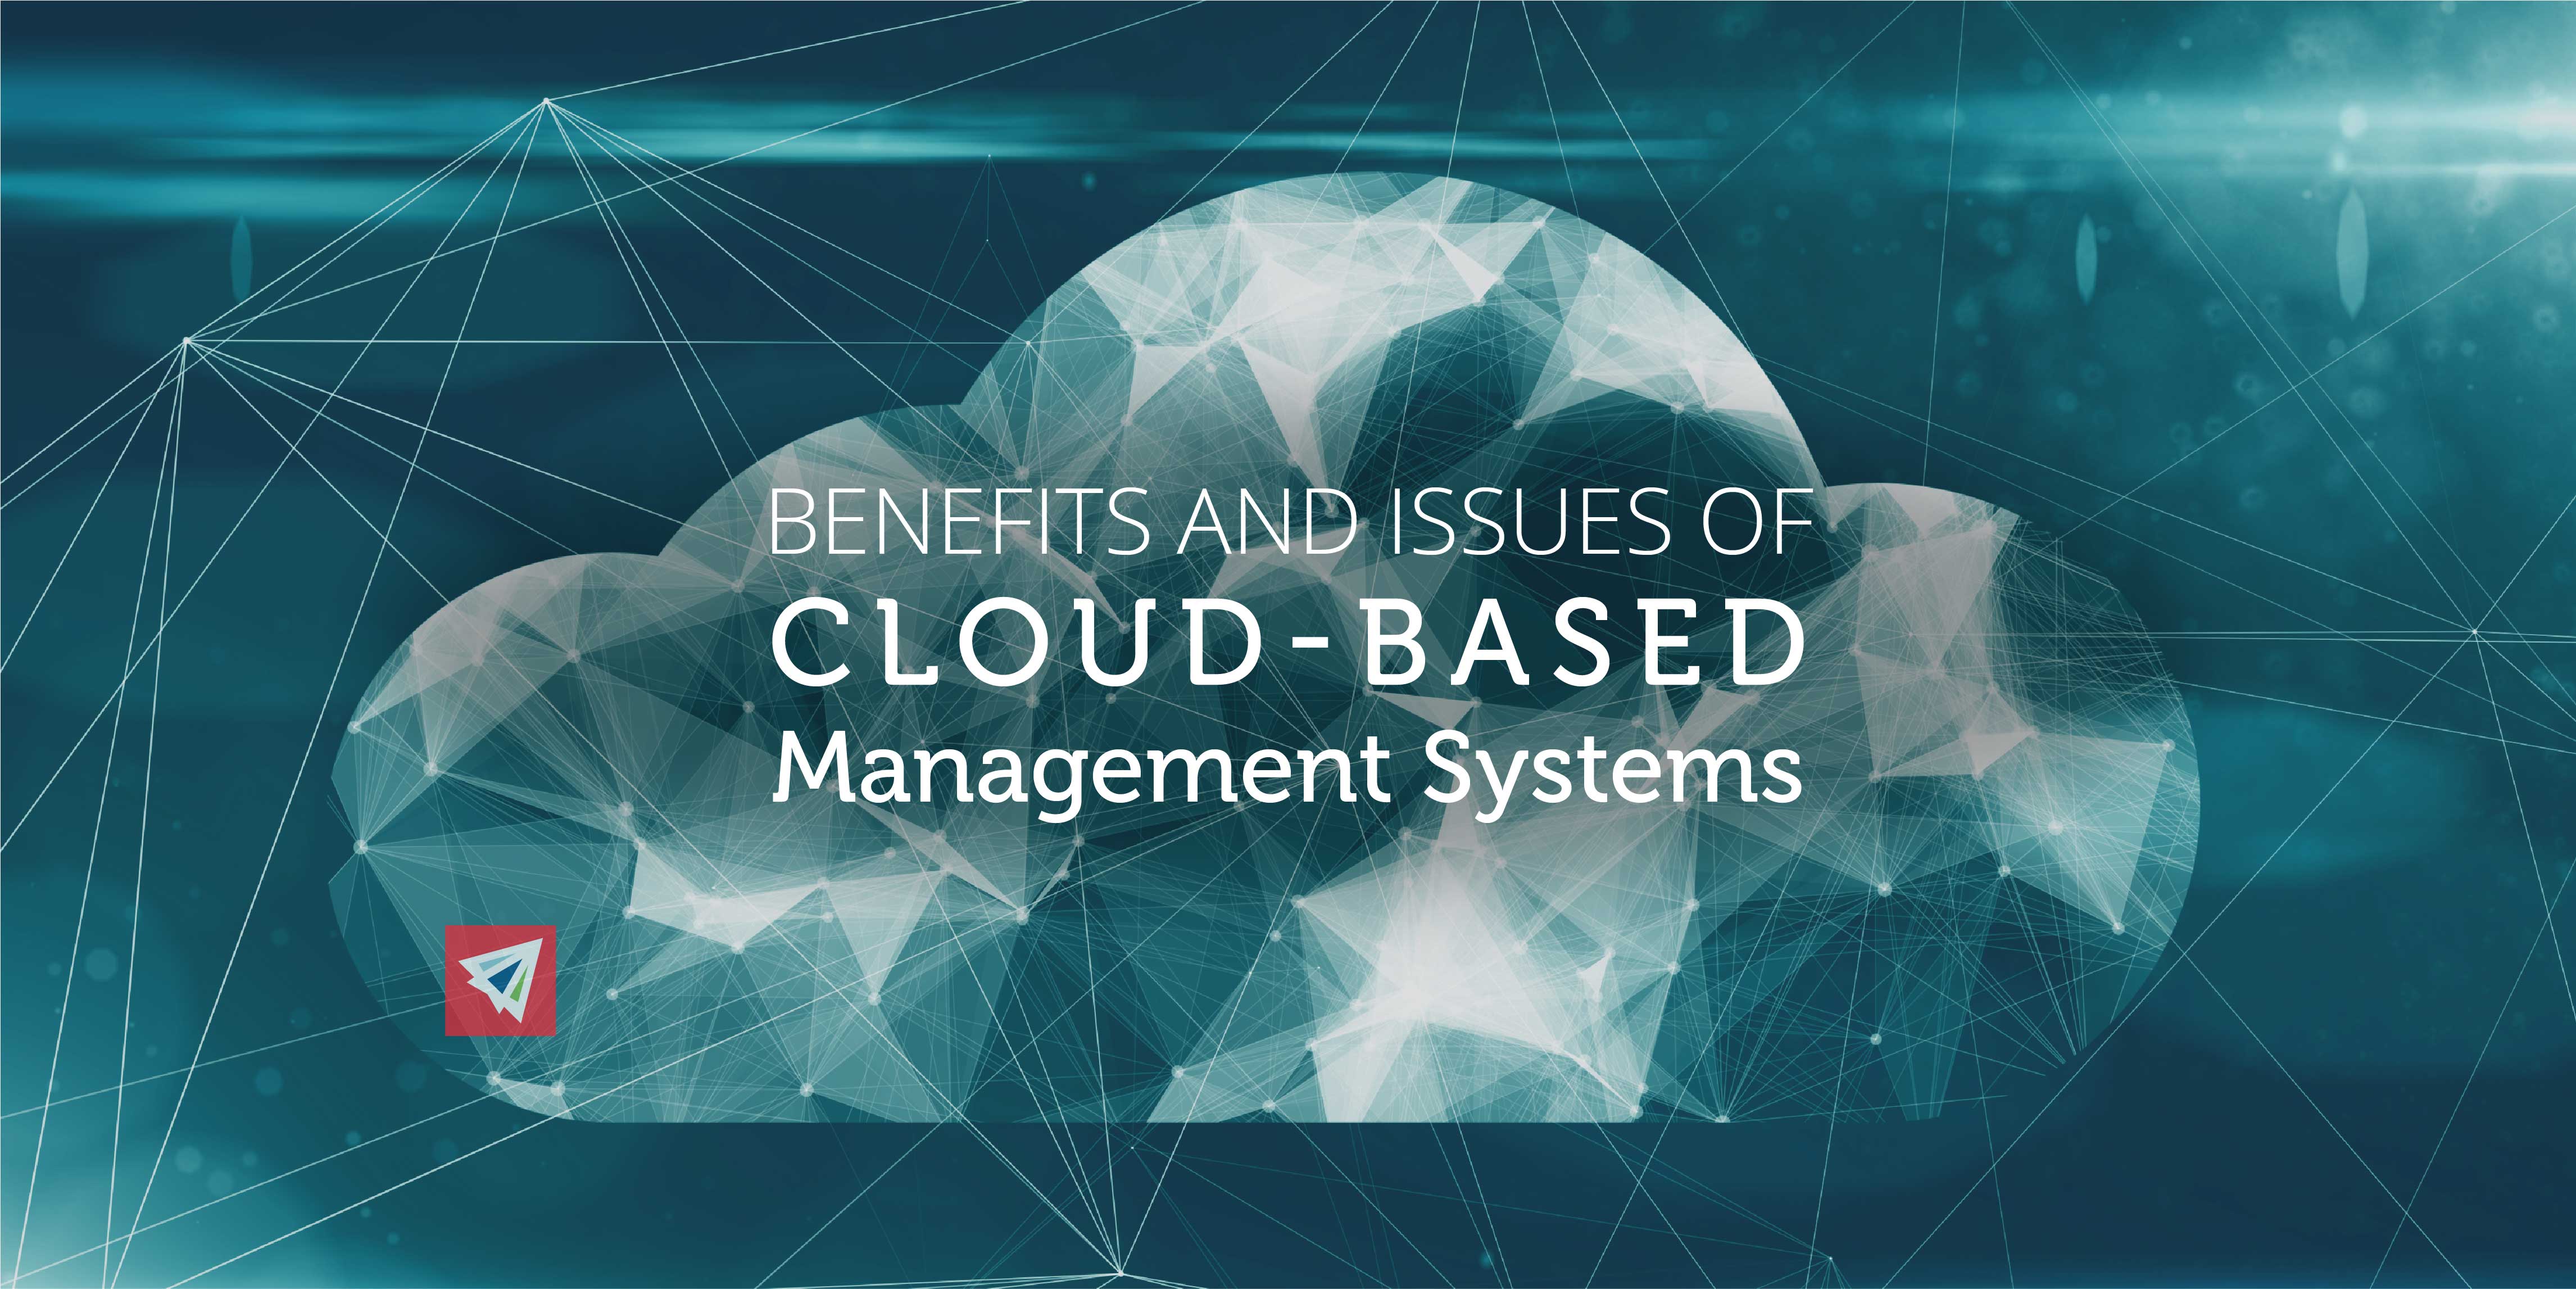 Benefits and Issues of Cloud-Based Management Systems